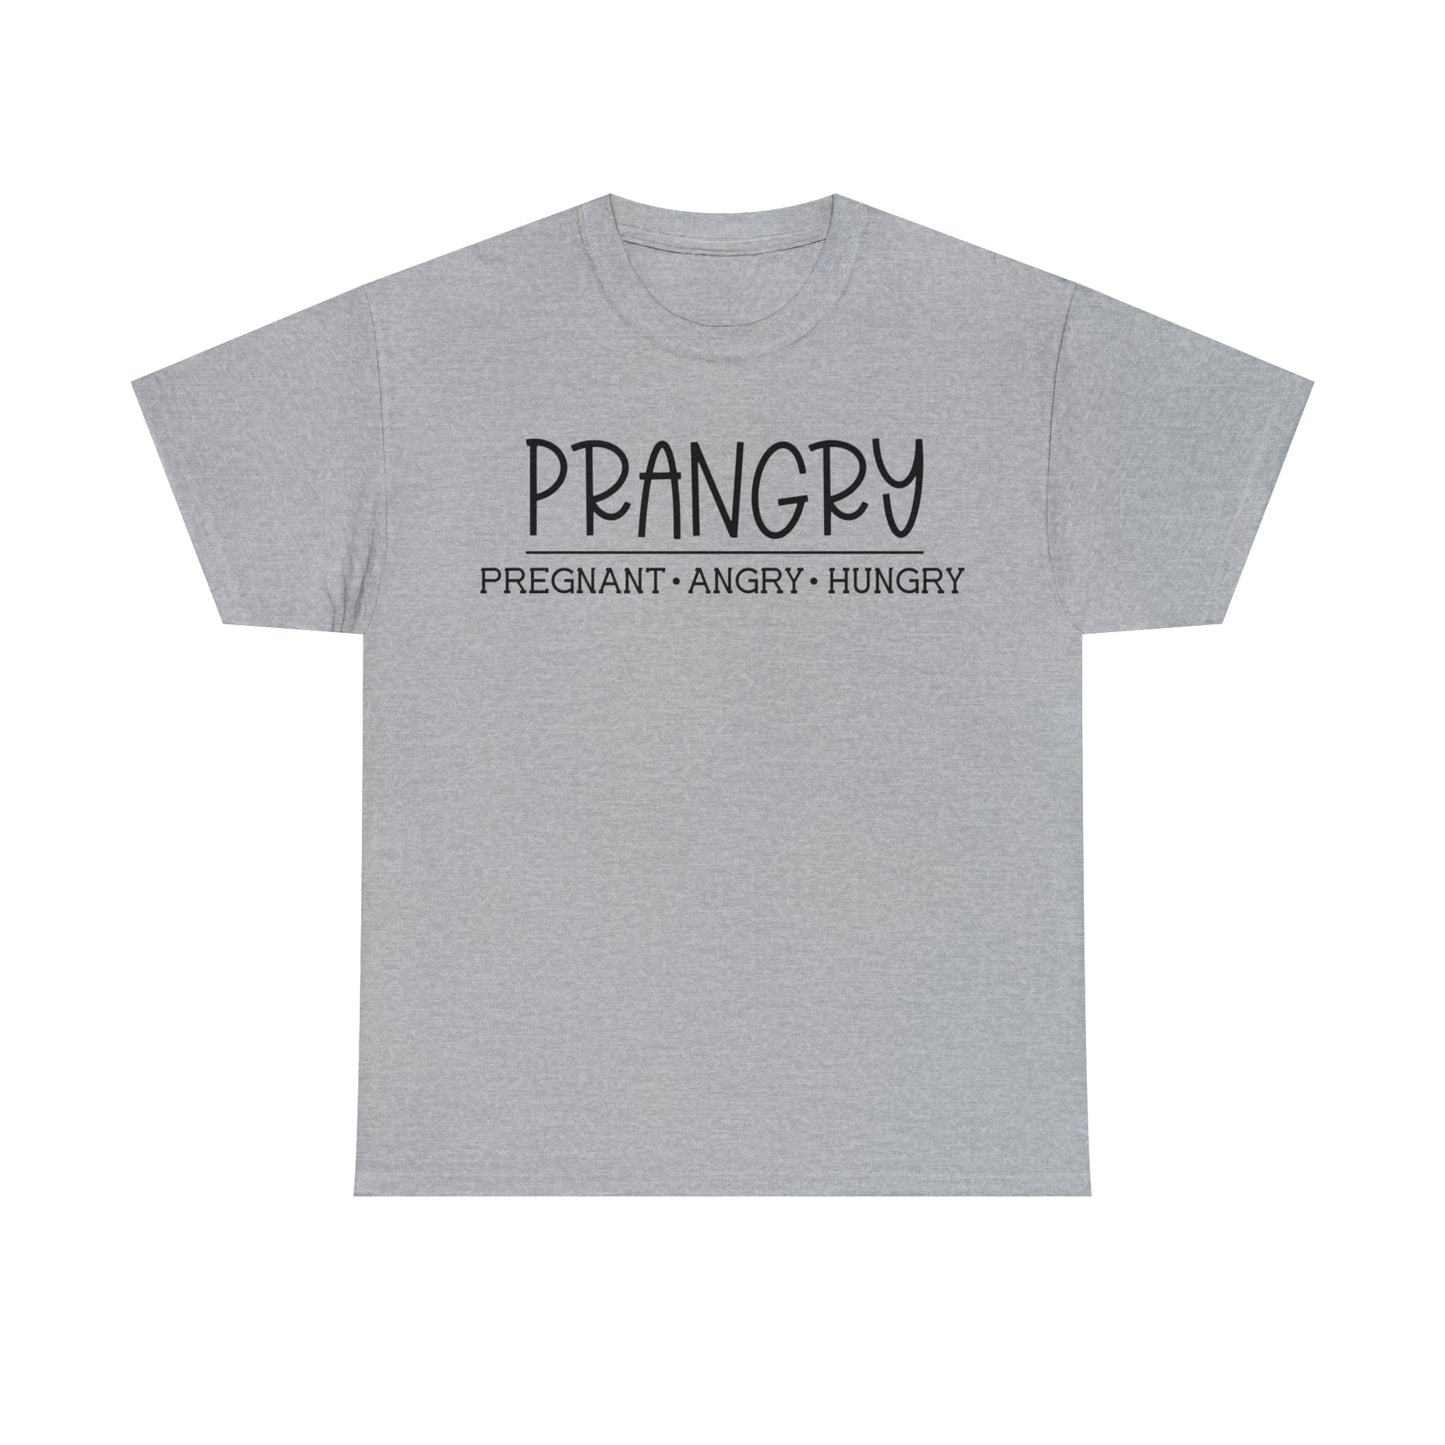 Prangry: Pregnant, angry, hungry (front) - Unisex T-shirt